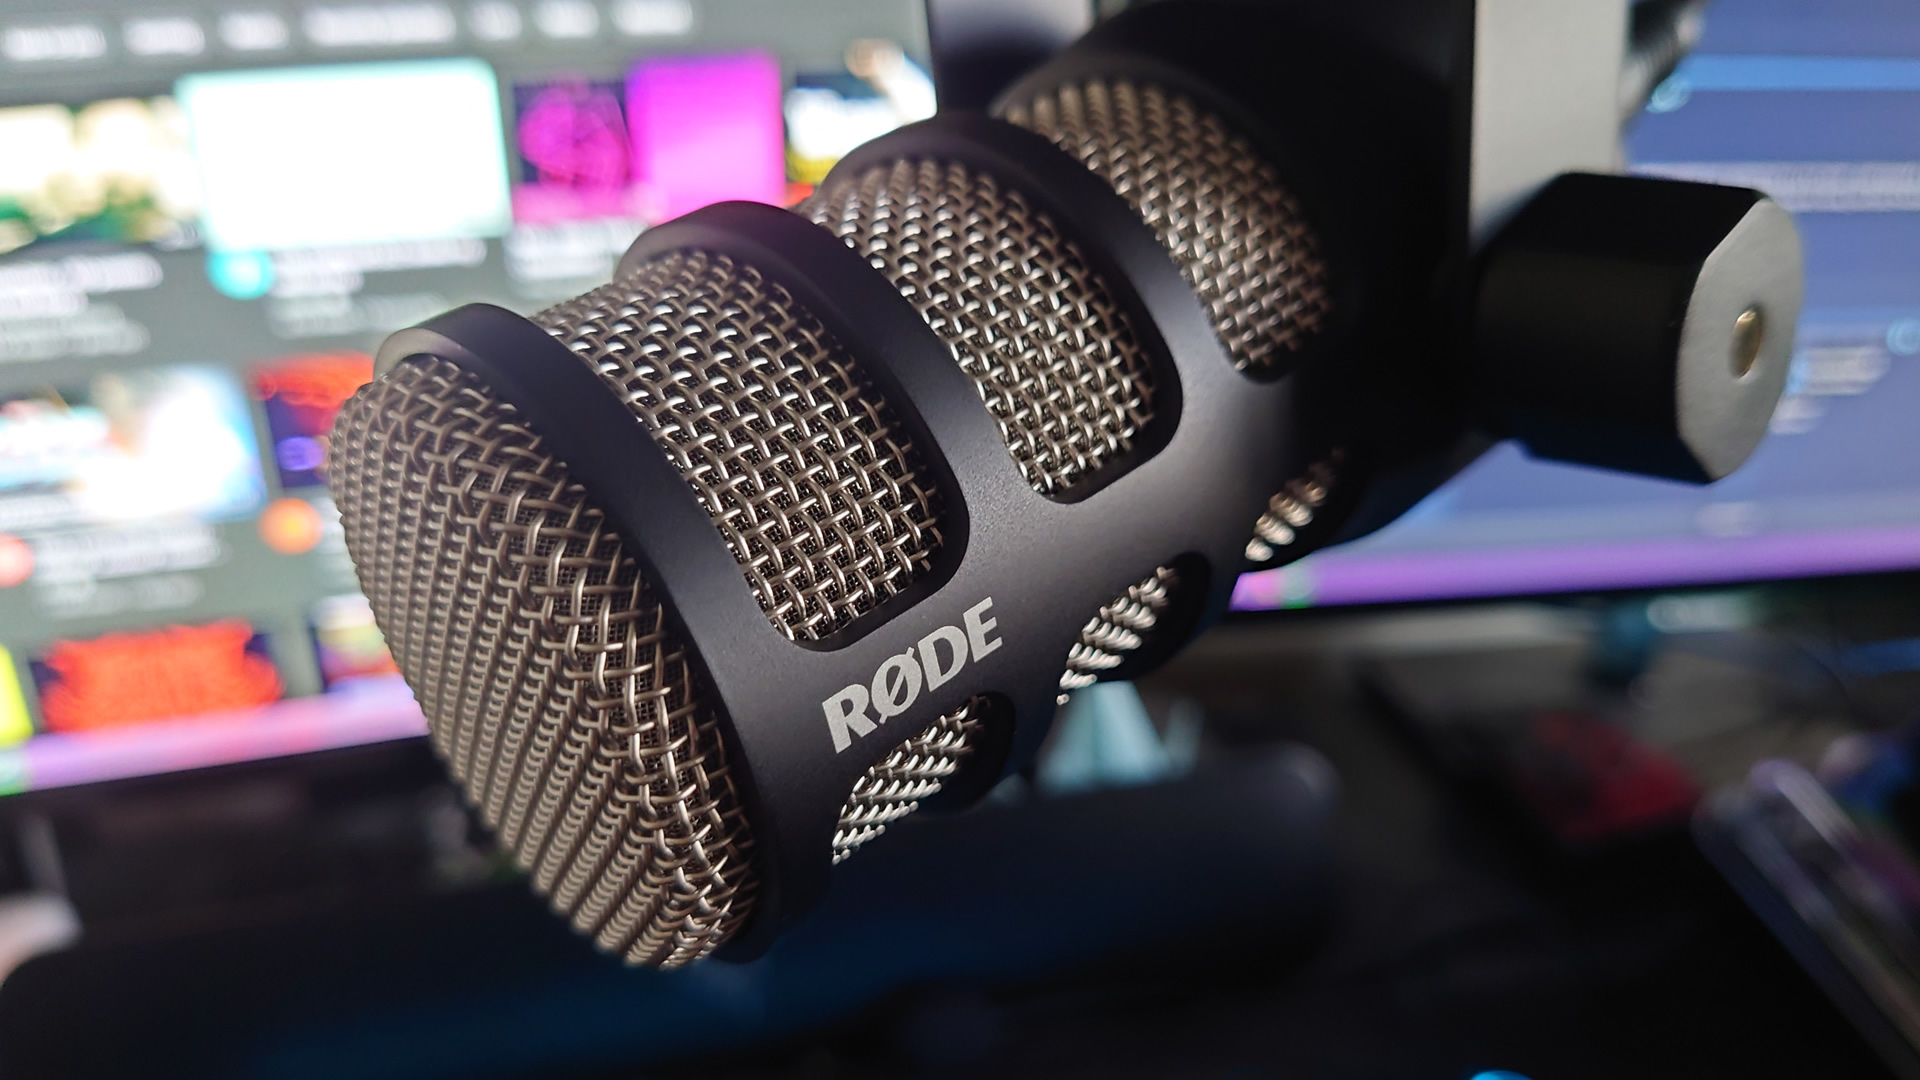 Rode PodMic review: Excellent sound quality at an aggressive